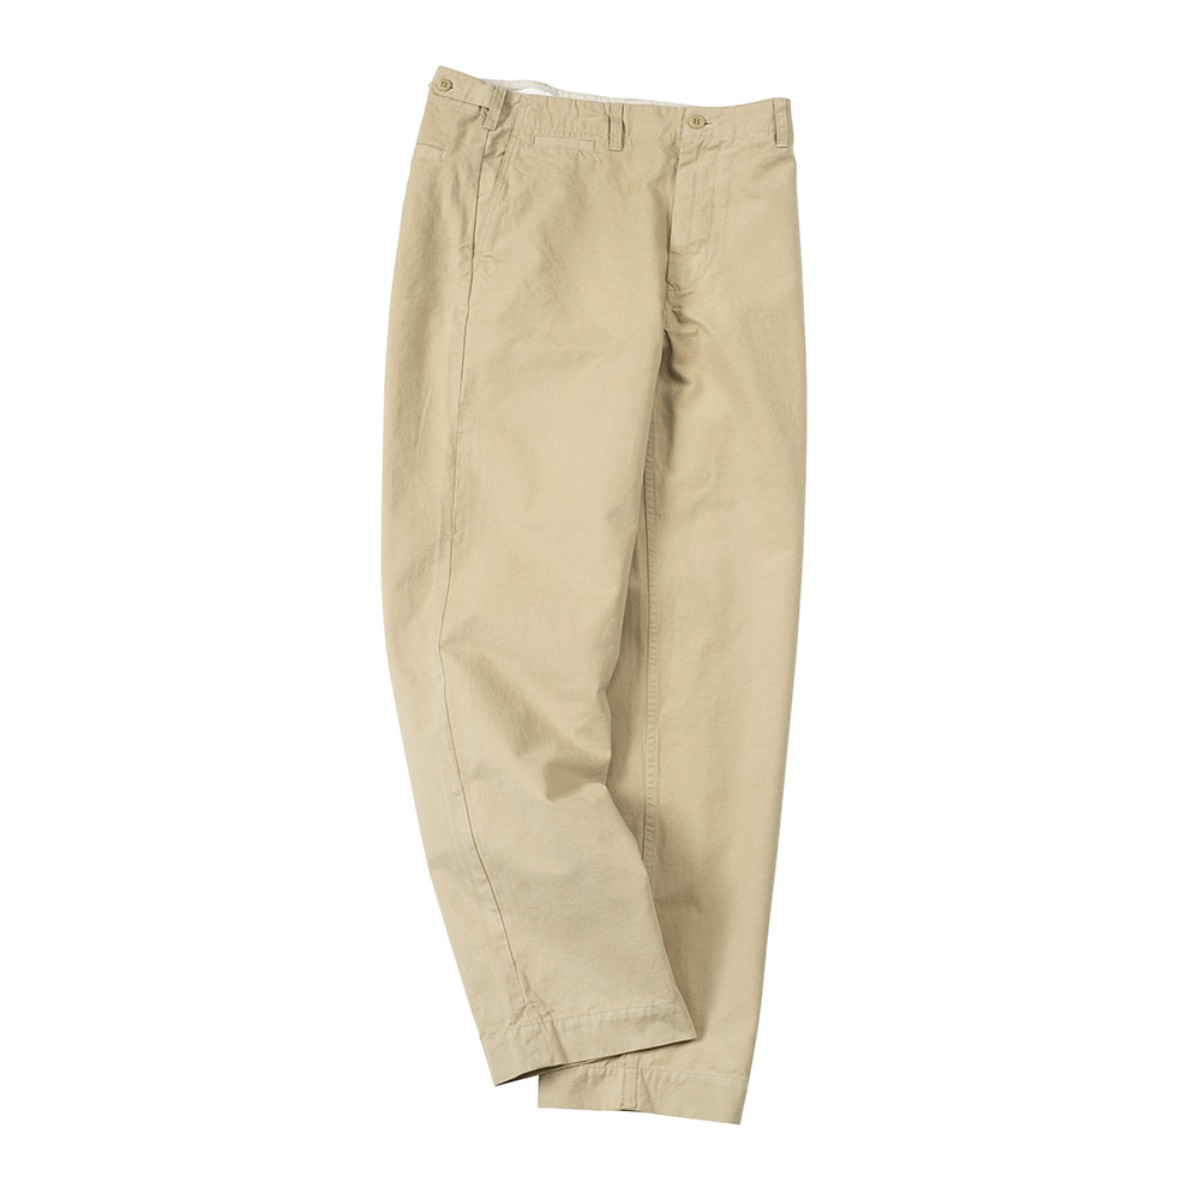  VTG FLAT FRONT OFFICER CHINO BLEACHED SAND